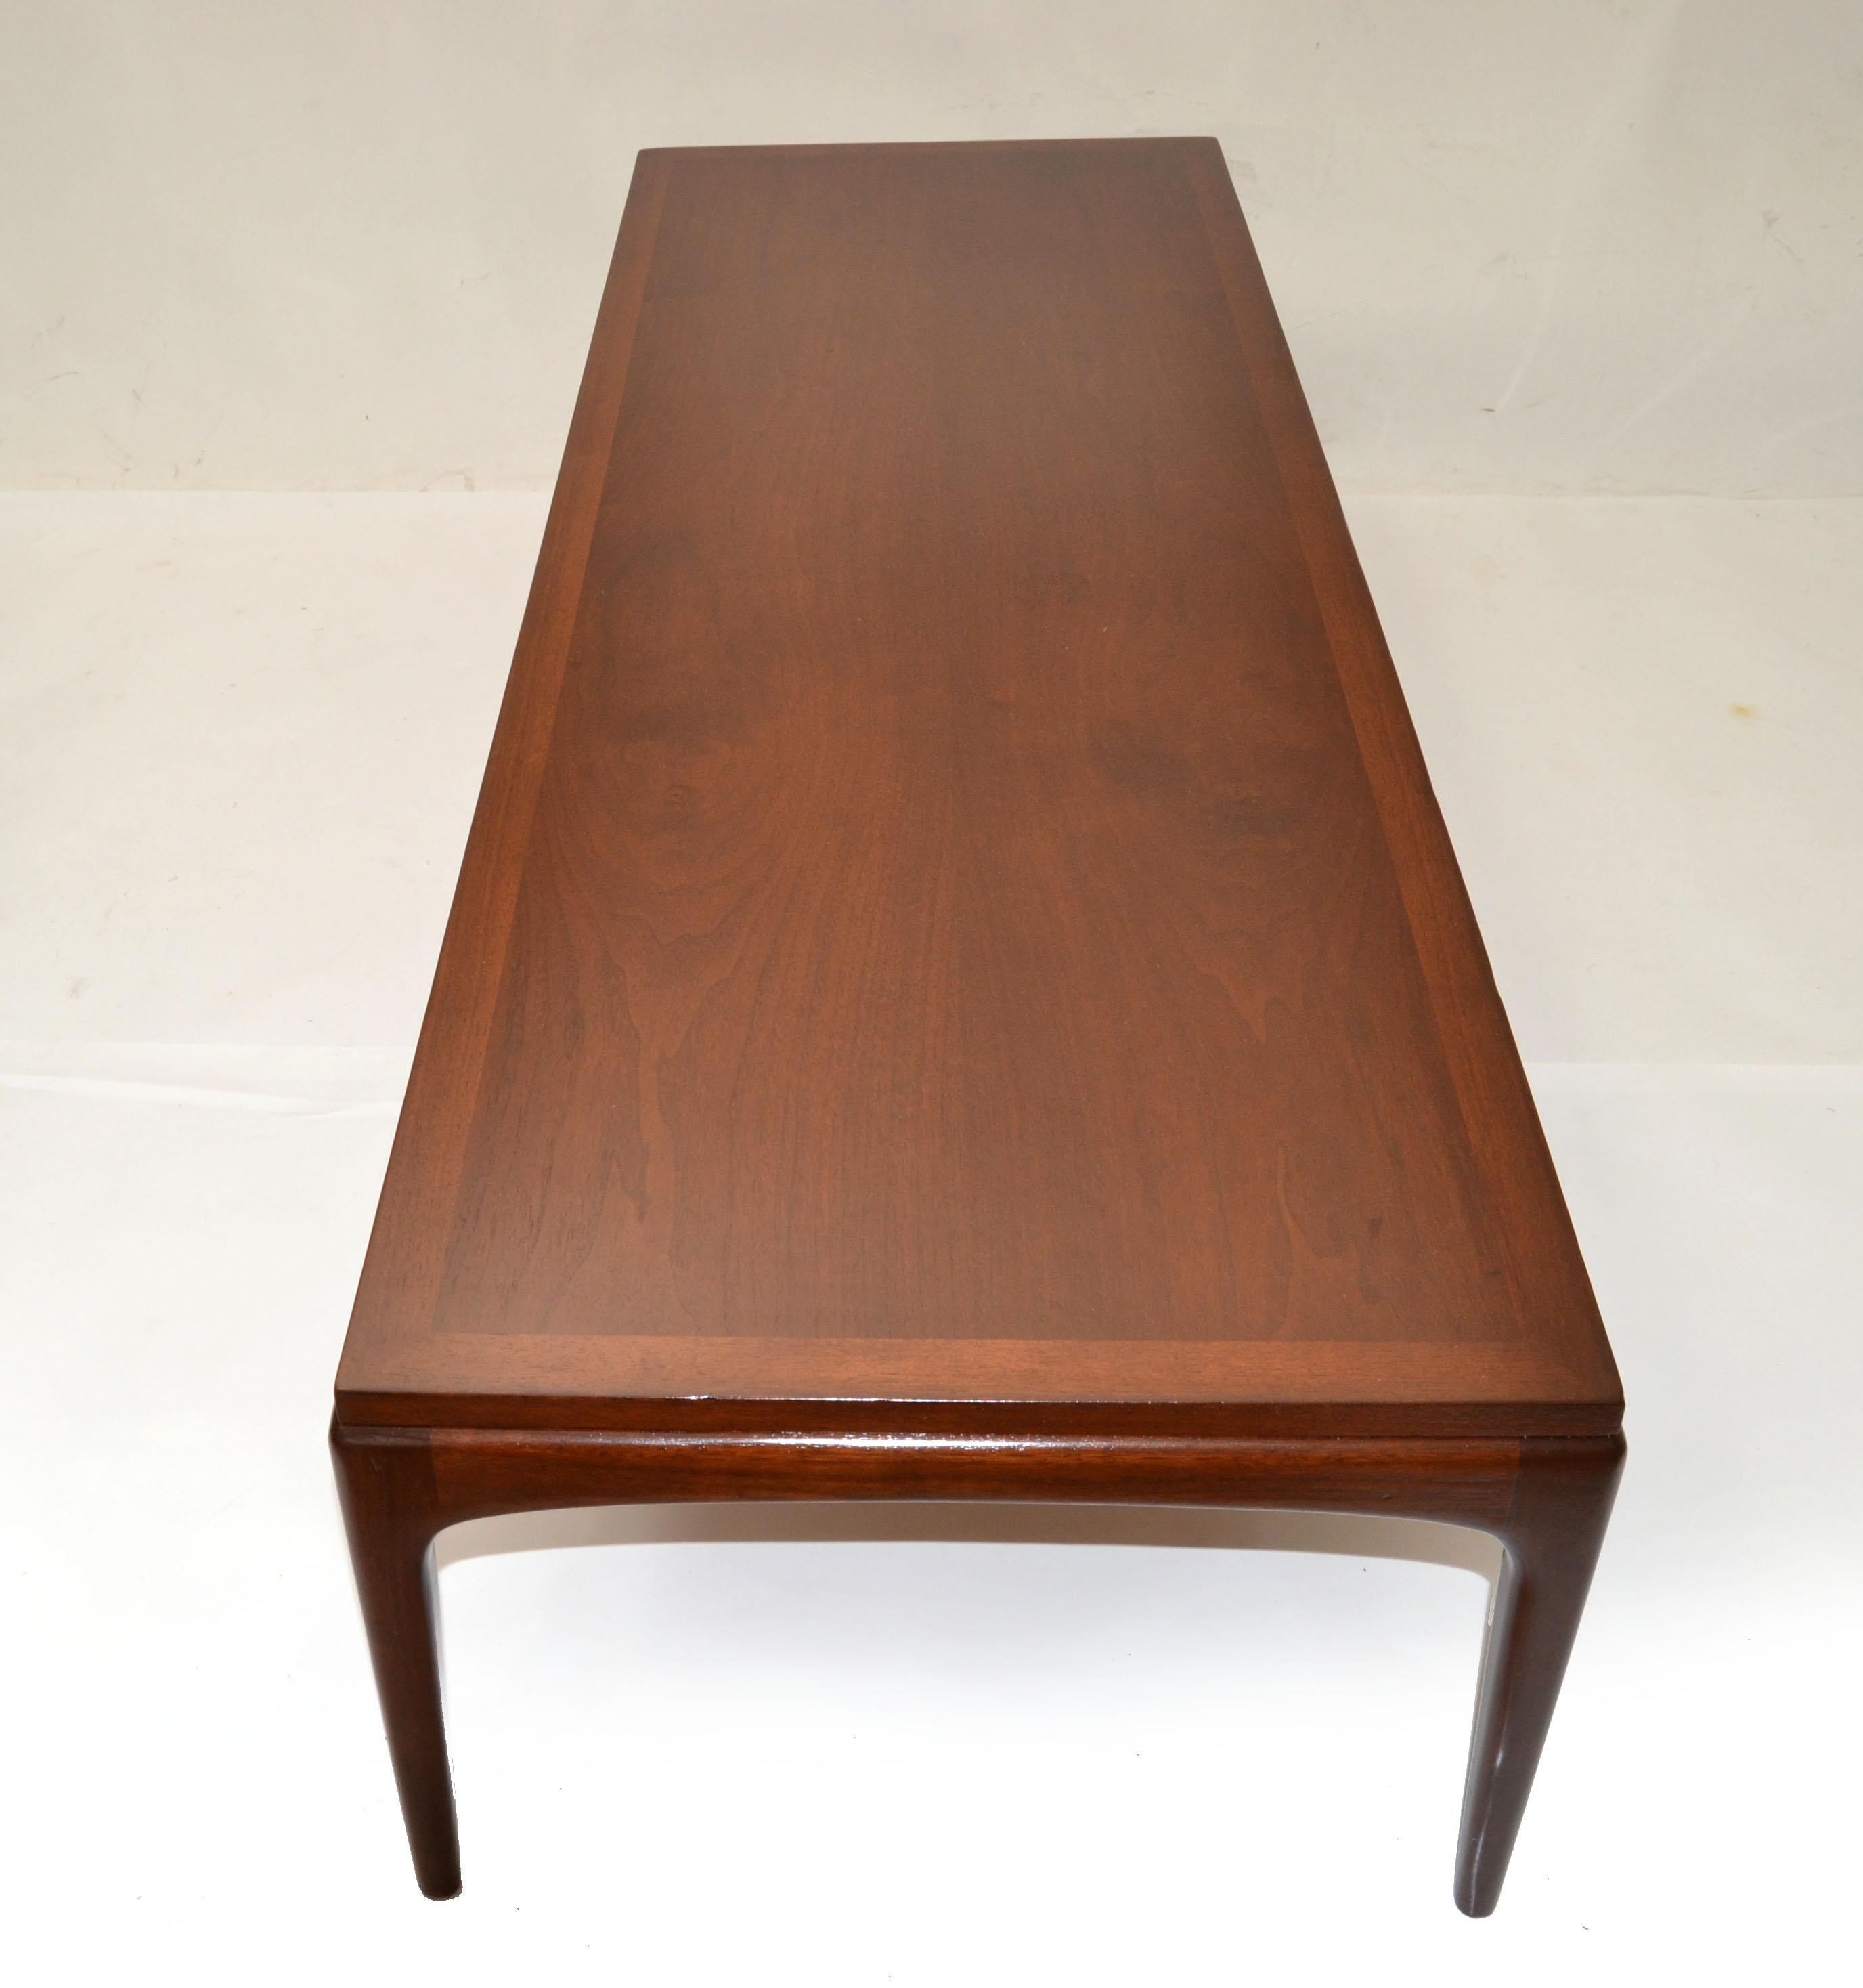 Gio Ponti Style Low Coffee Table Tapered Legs Walnut Mid-Century Modern Italy 70 For Sale 2